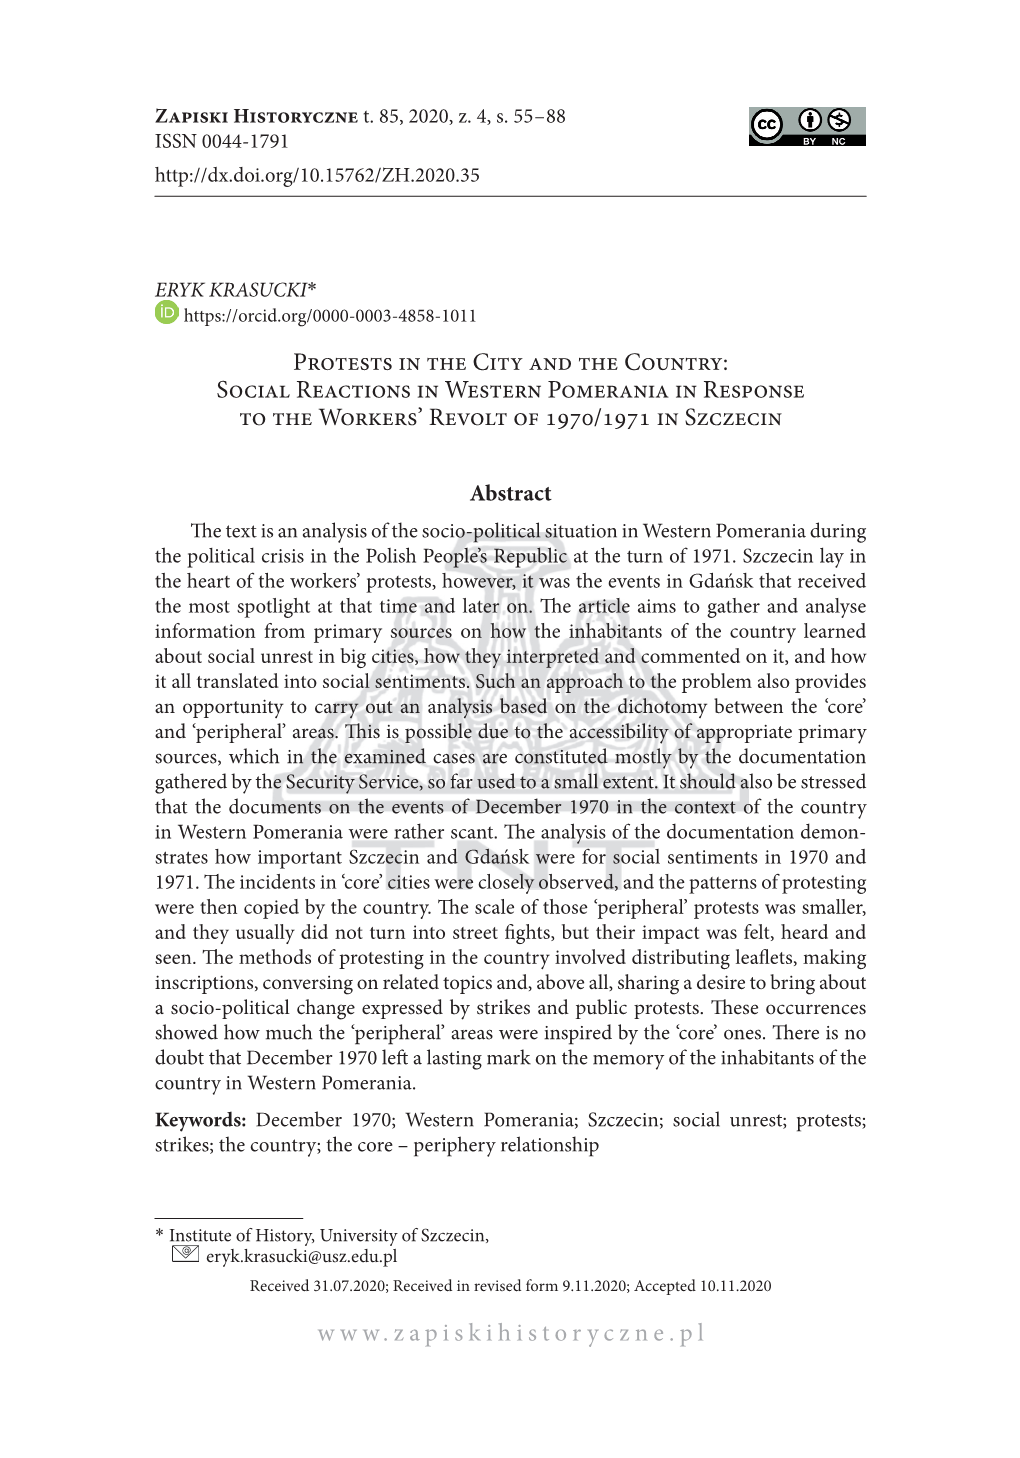 Protests in the City and the Country: Social Reactions in Western Pomerania in Response to the Workers’ Revolt of 1970/1971 in Szczecin